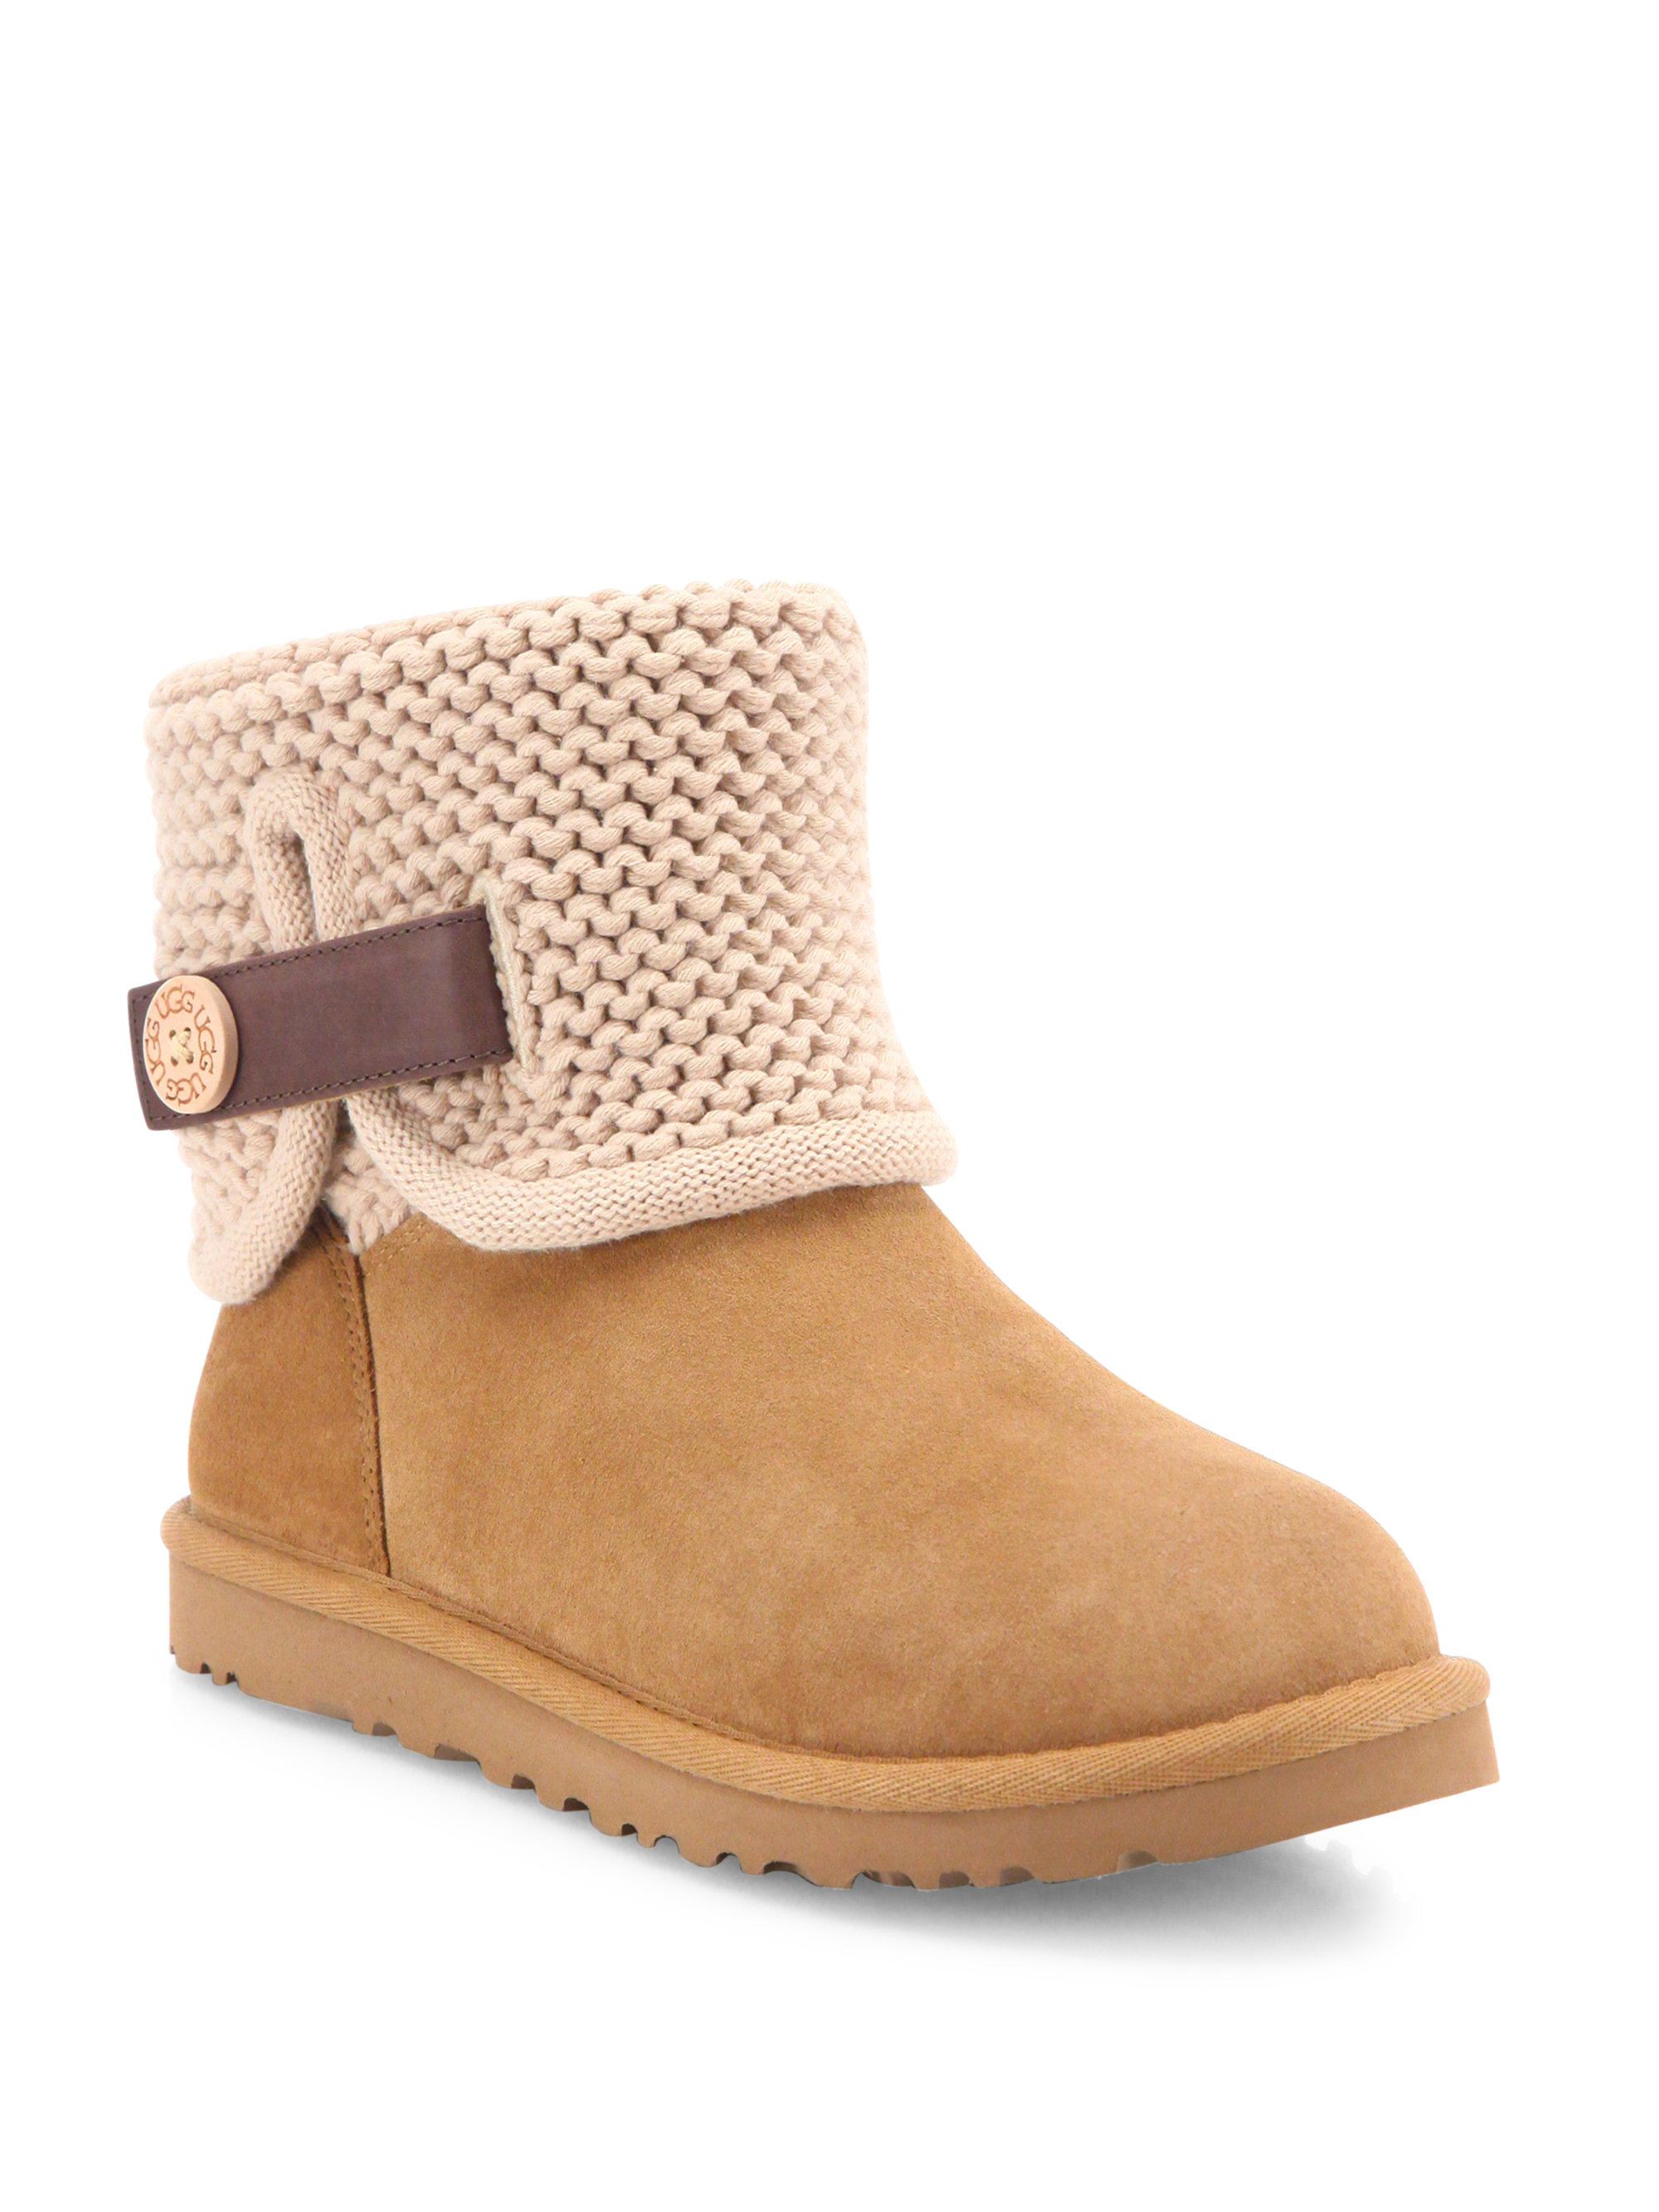 ugg boots with knitted top, OFF 77%,Cheap,